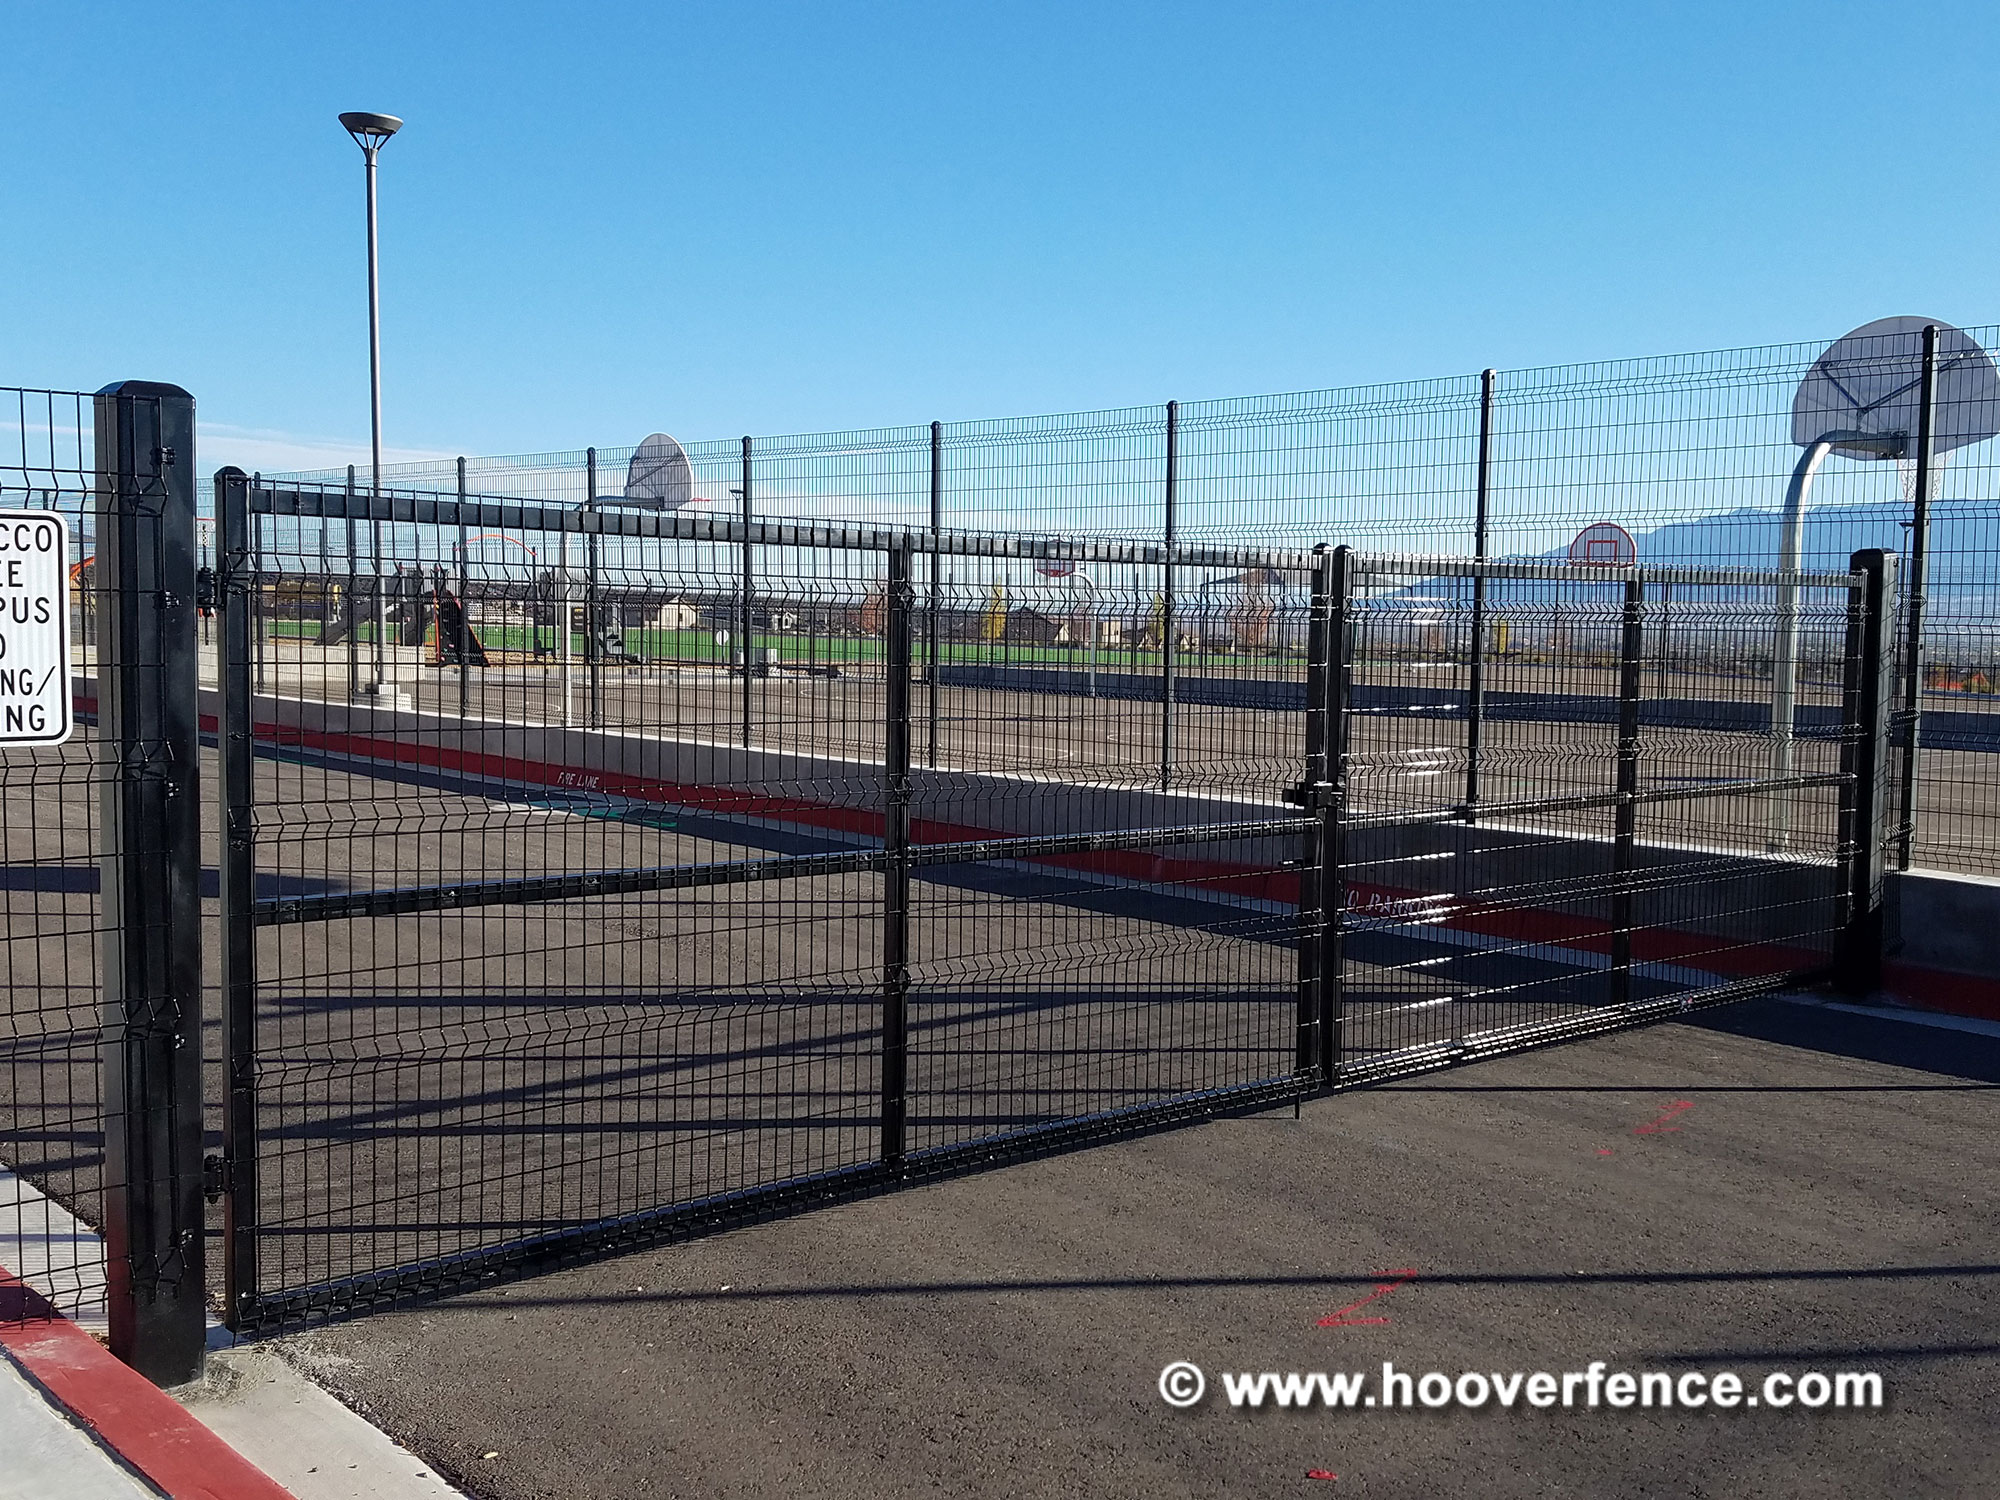 Customer Install - DAC-4090-B Latches Installed on Black Welded Wire Gates